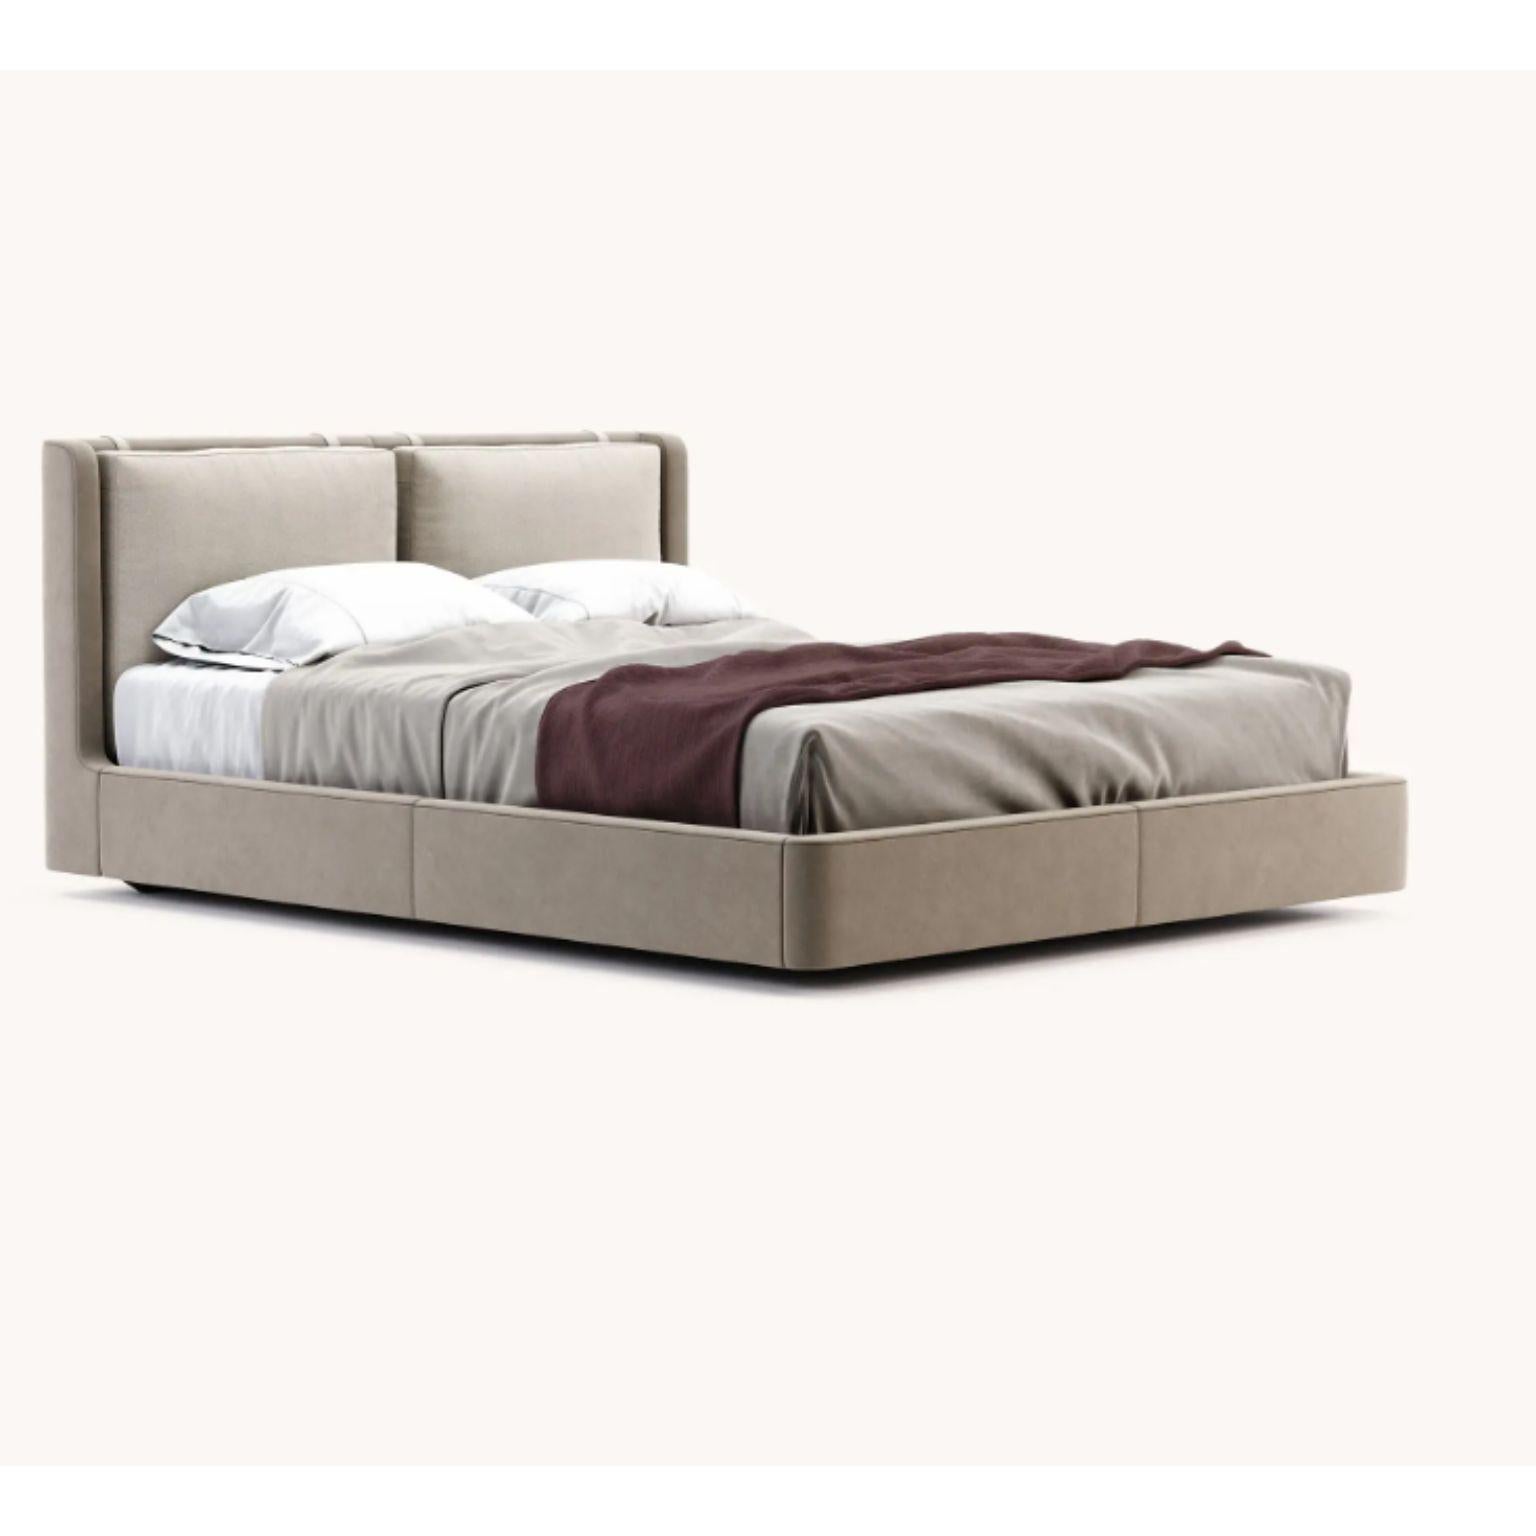 King Size Kelsi bed by Domkapa
Dimensions: W 209 x D 231 x H 95 cm.
Materials: Microfiber (Tarn 03), patterned fabric (Verdon 01), rose gold brushed.
Also available in different materials.

Kelsi is an outstanding design and handcraft work,